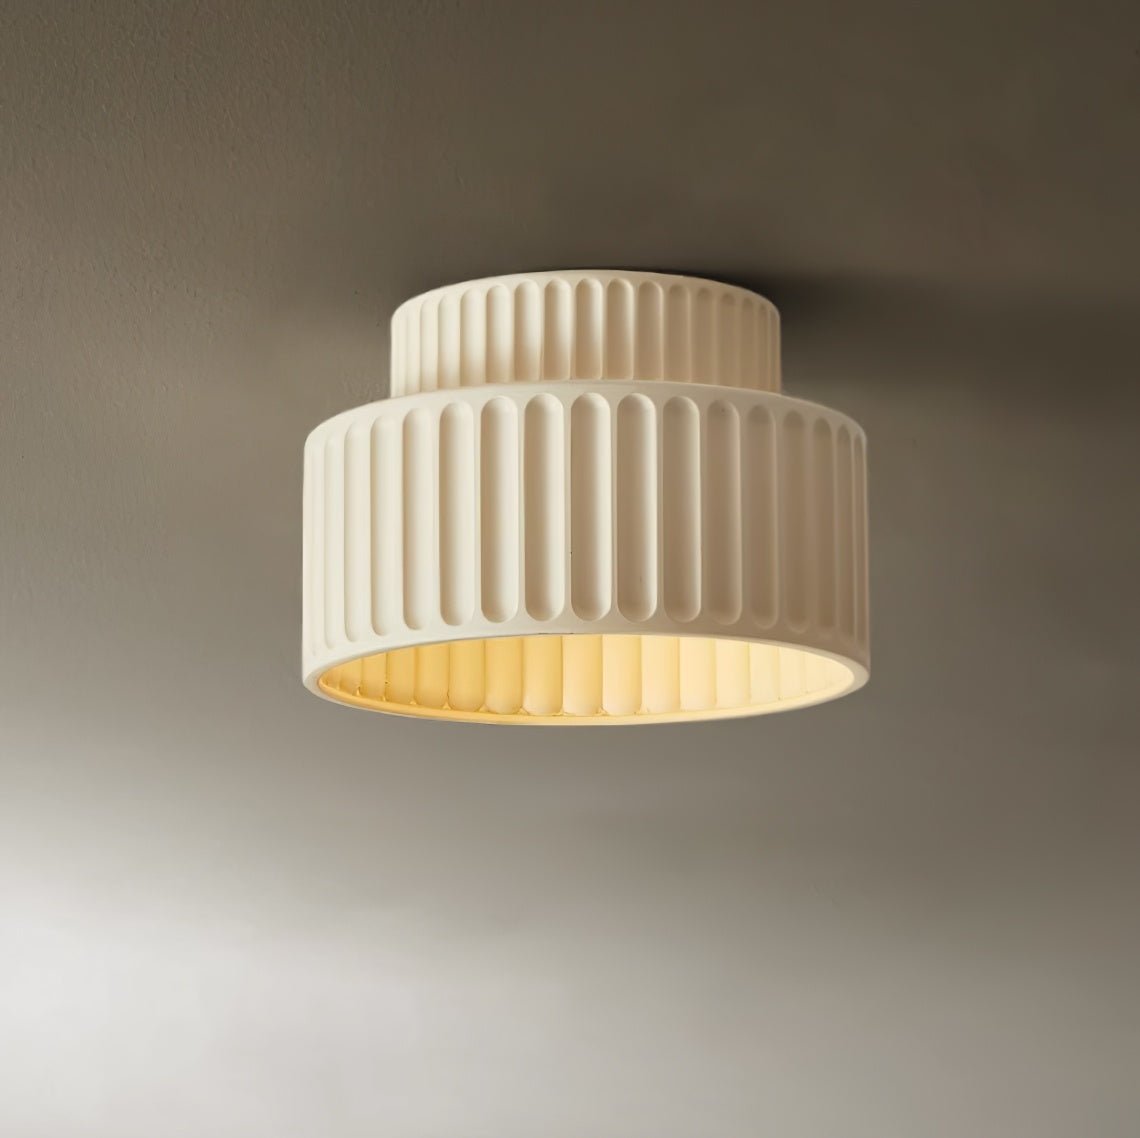 Beige Kami Ceiling Lamp with a Diameter of 11.8 inches and a Height of 6.2 inches (23cm x 16cm)